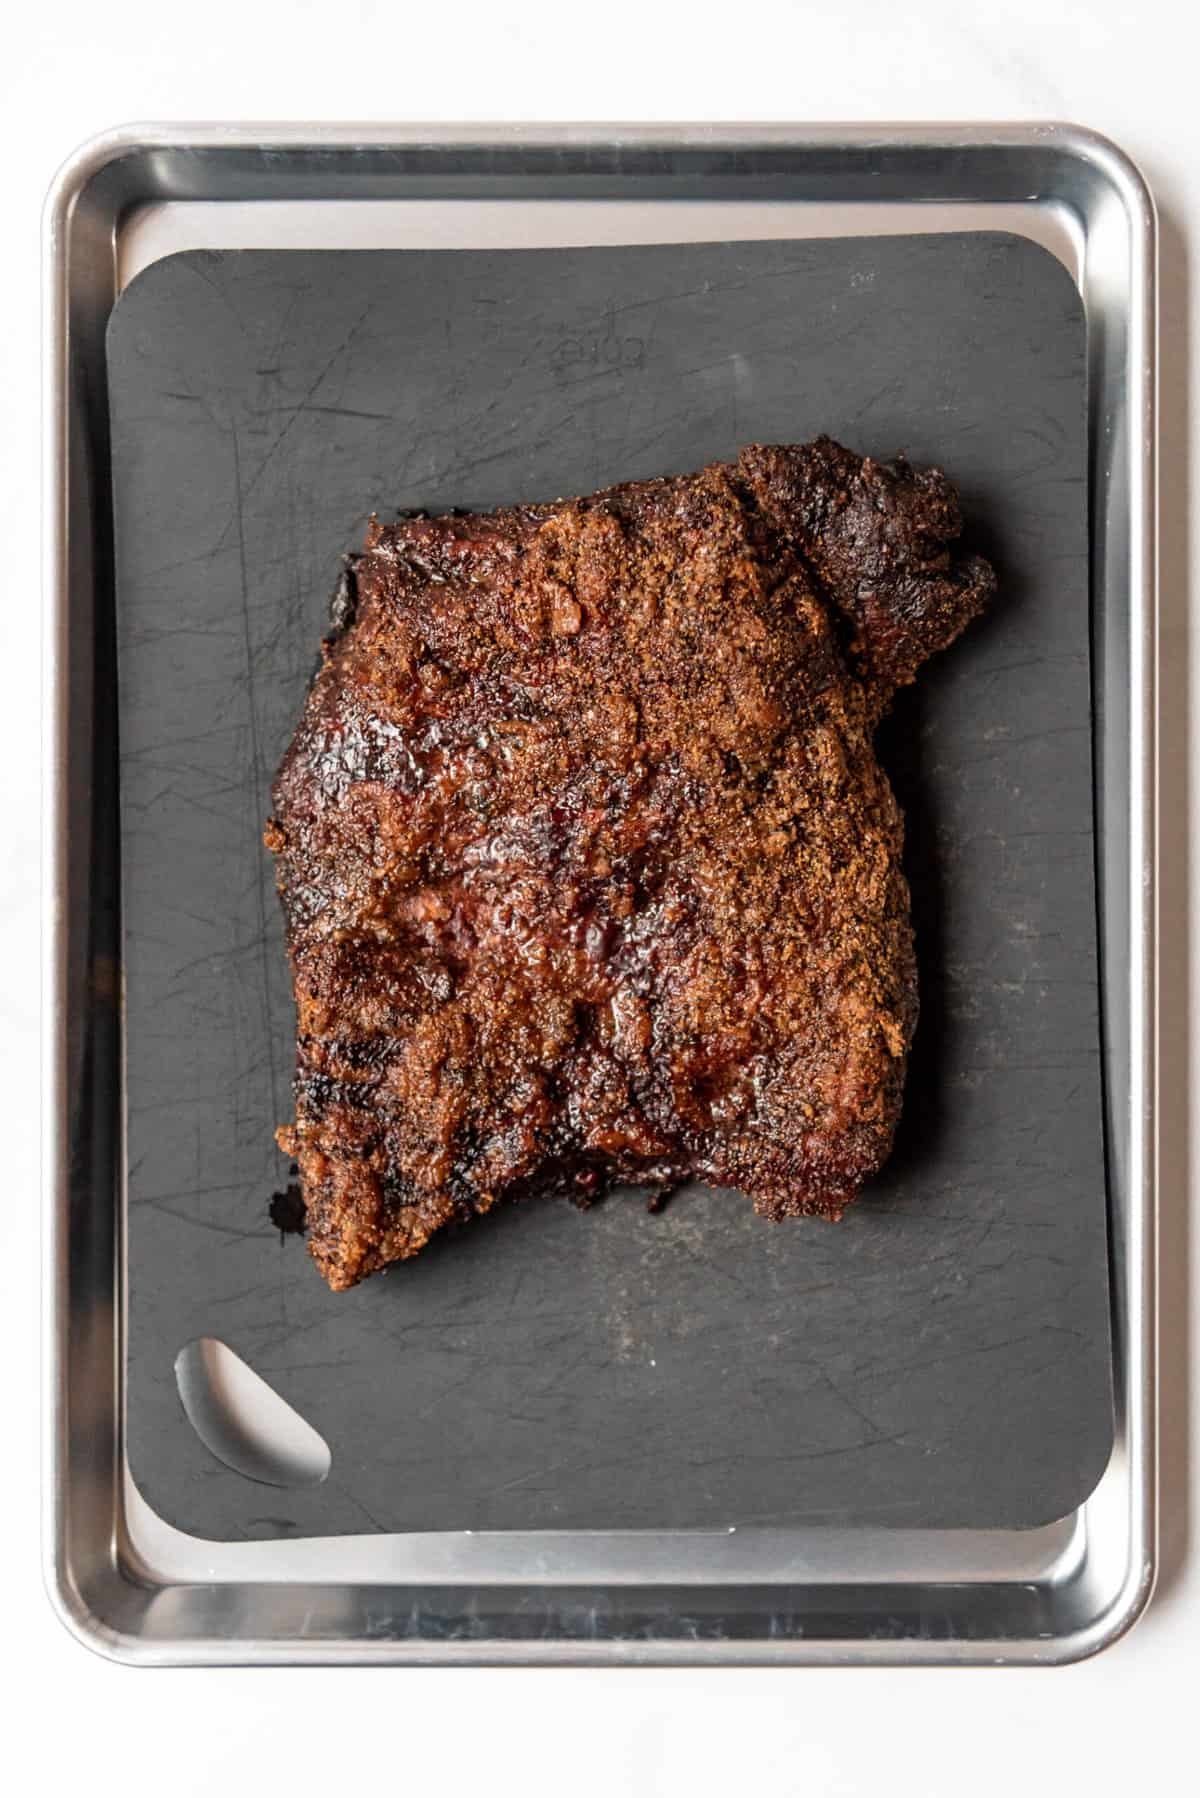 A cooked beef brisket point on a grey baking sheet.